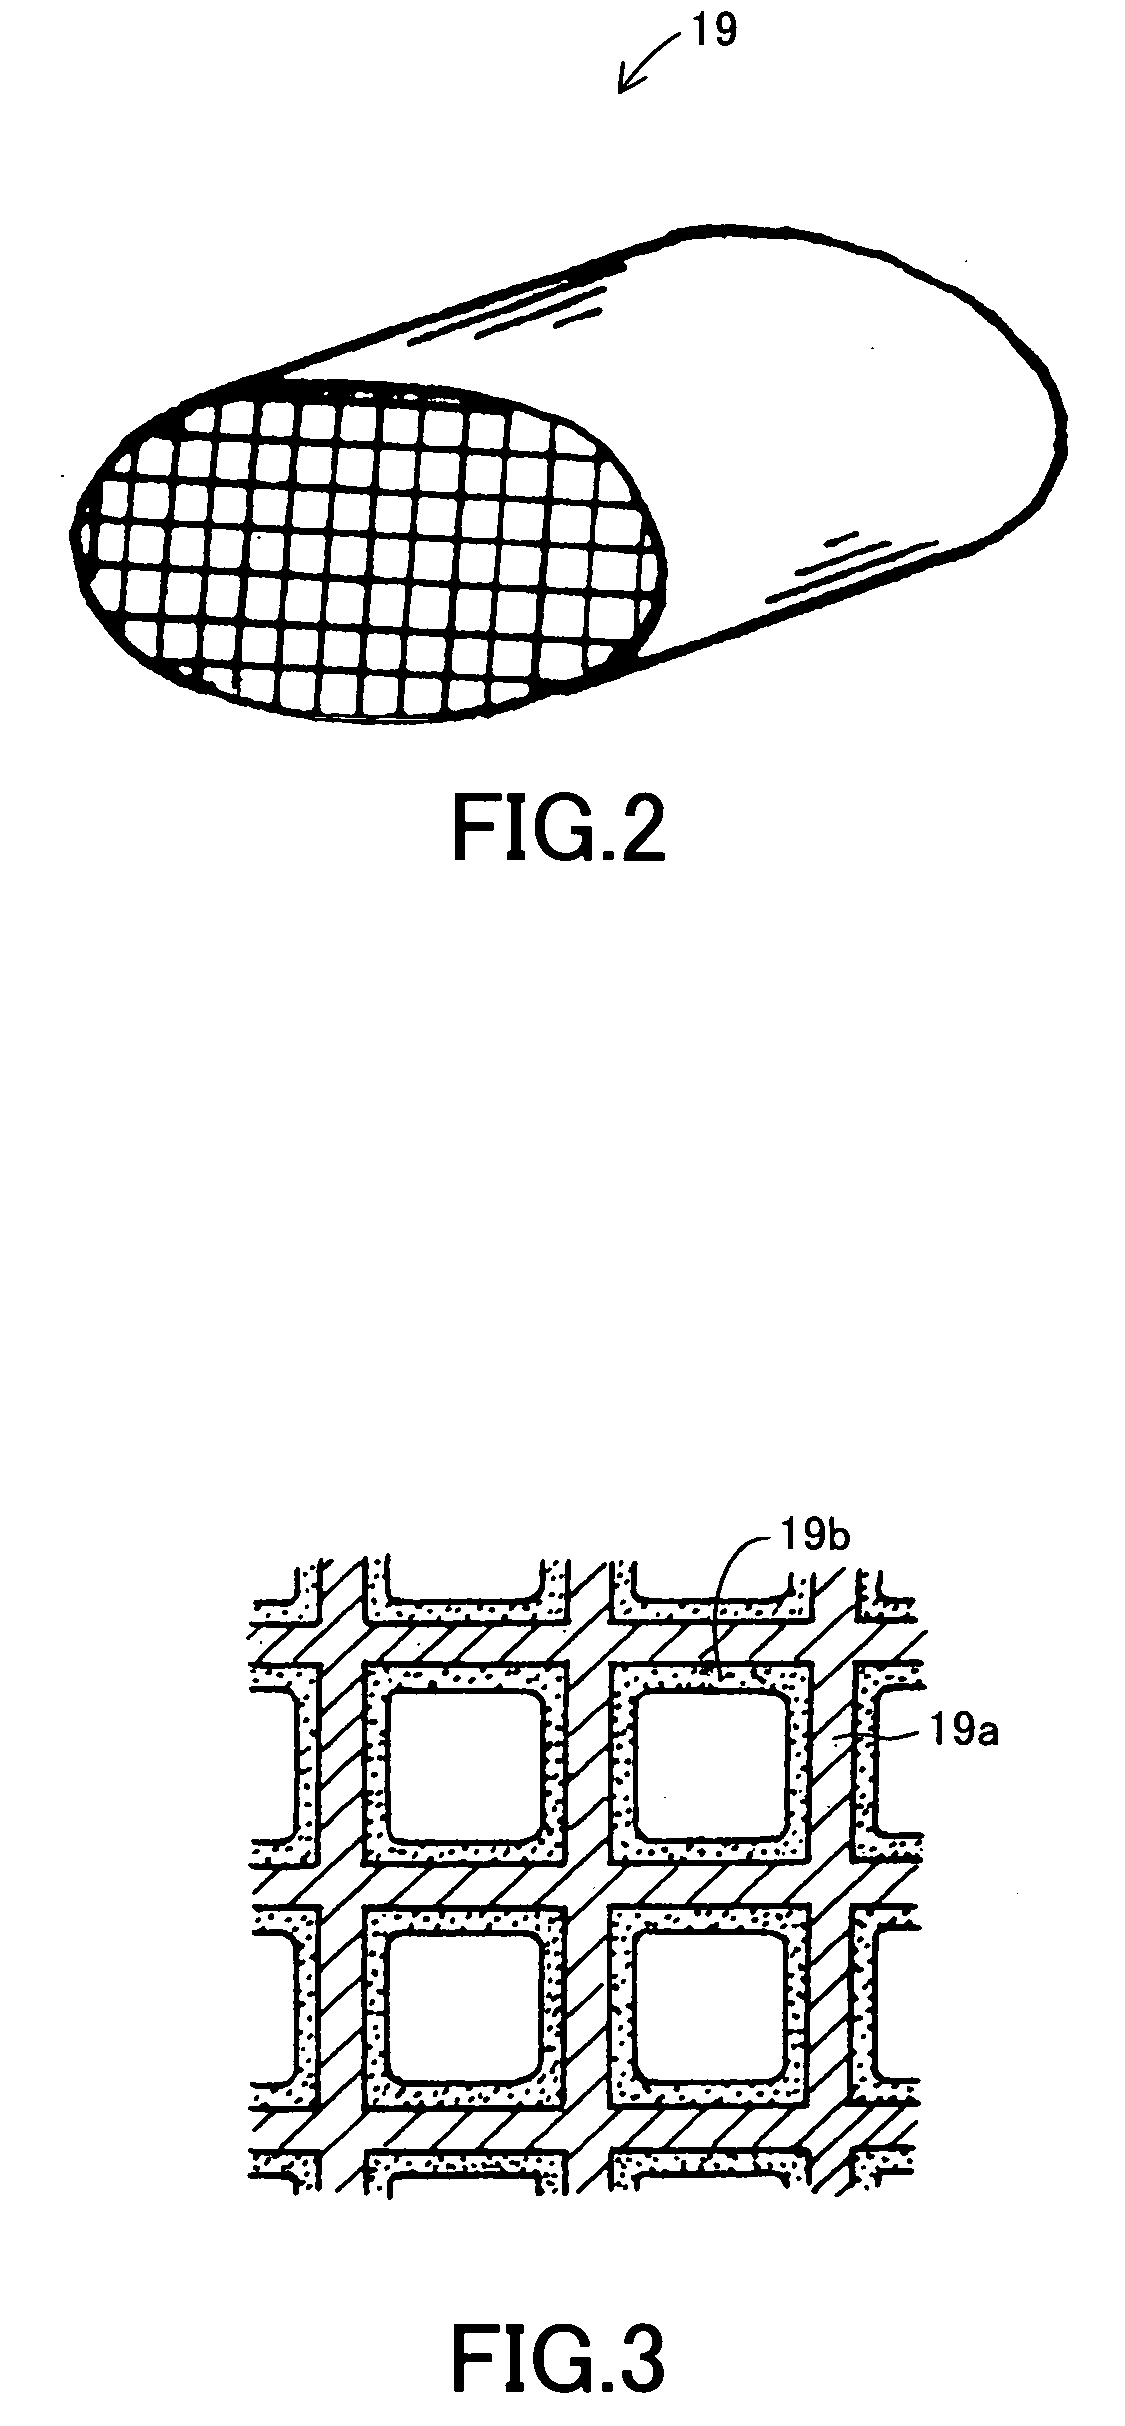 Air-fuel ratio control apparatus for internal combustion engine